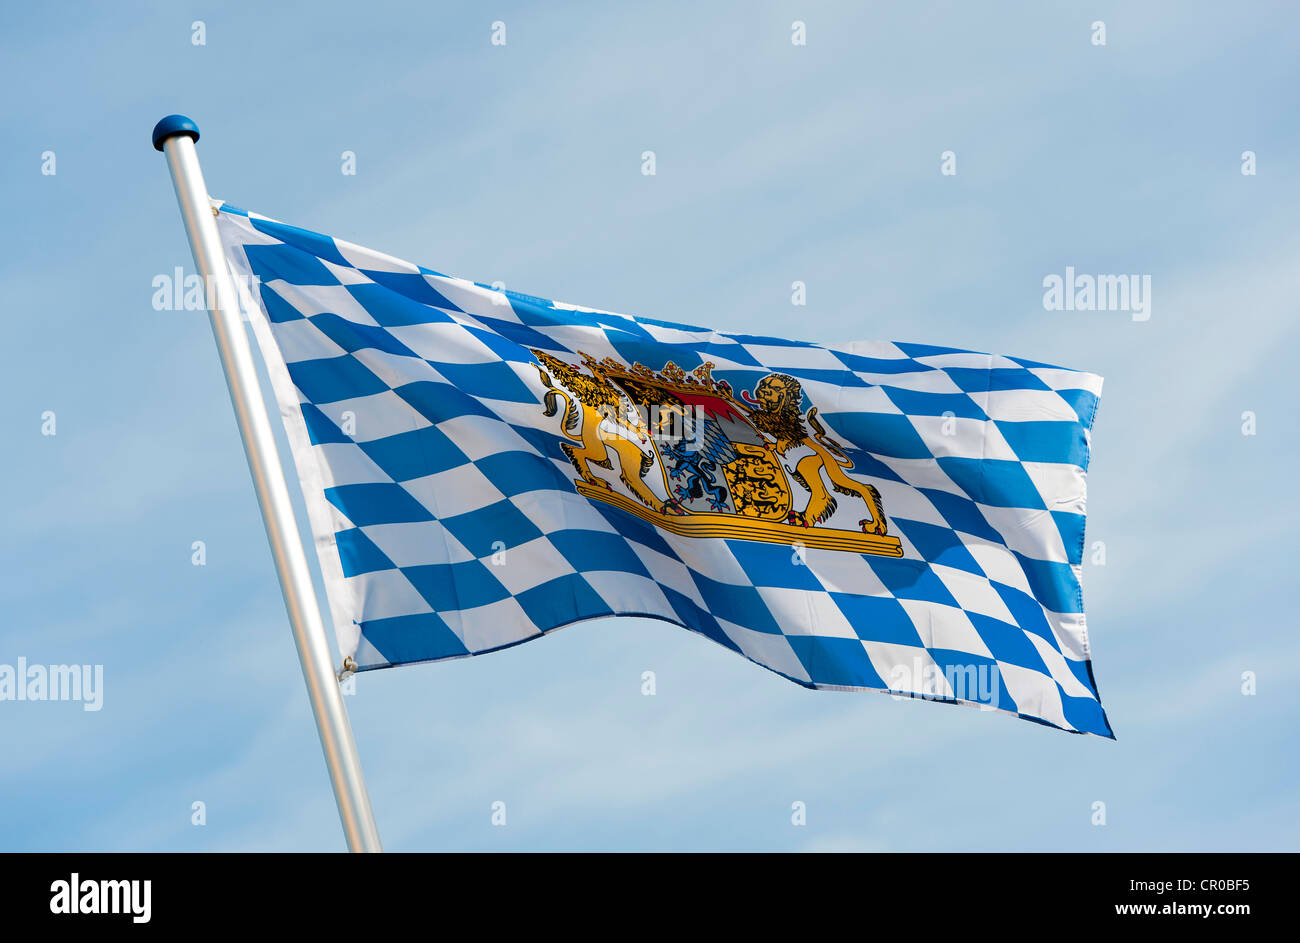 Blue and white flag with the coat of arms of the Free State of Bavaria is blowing in the wind Stock Photo